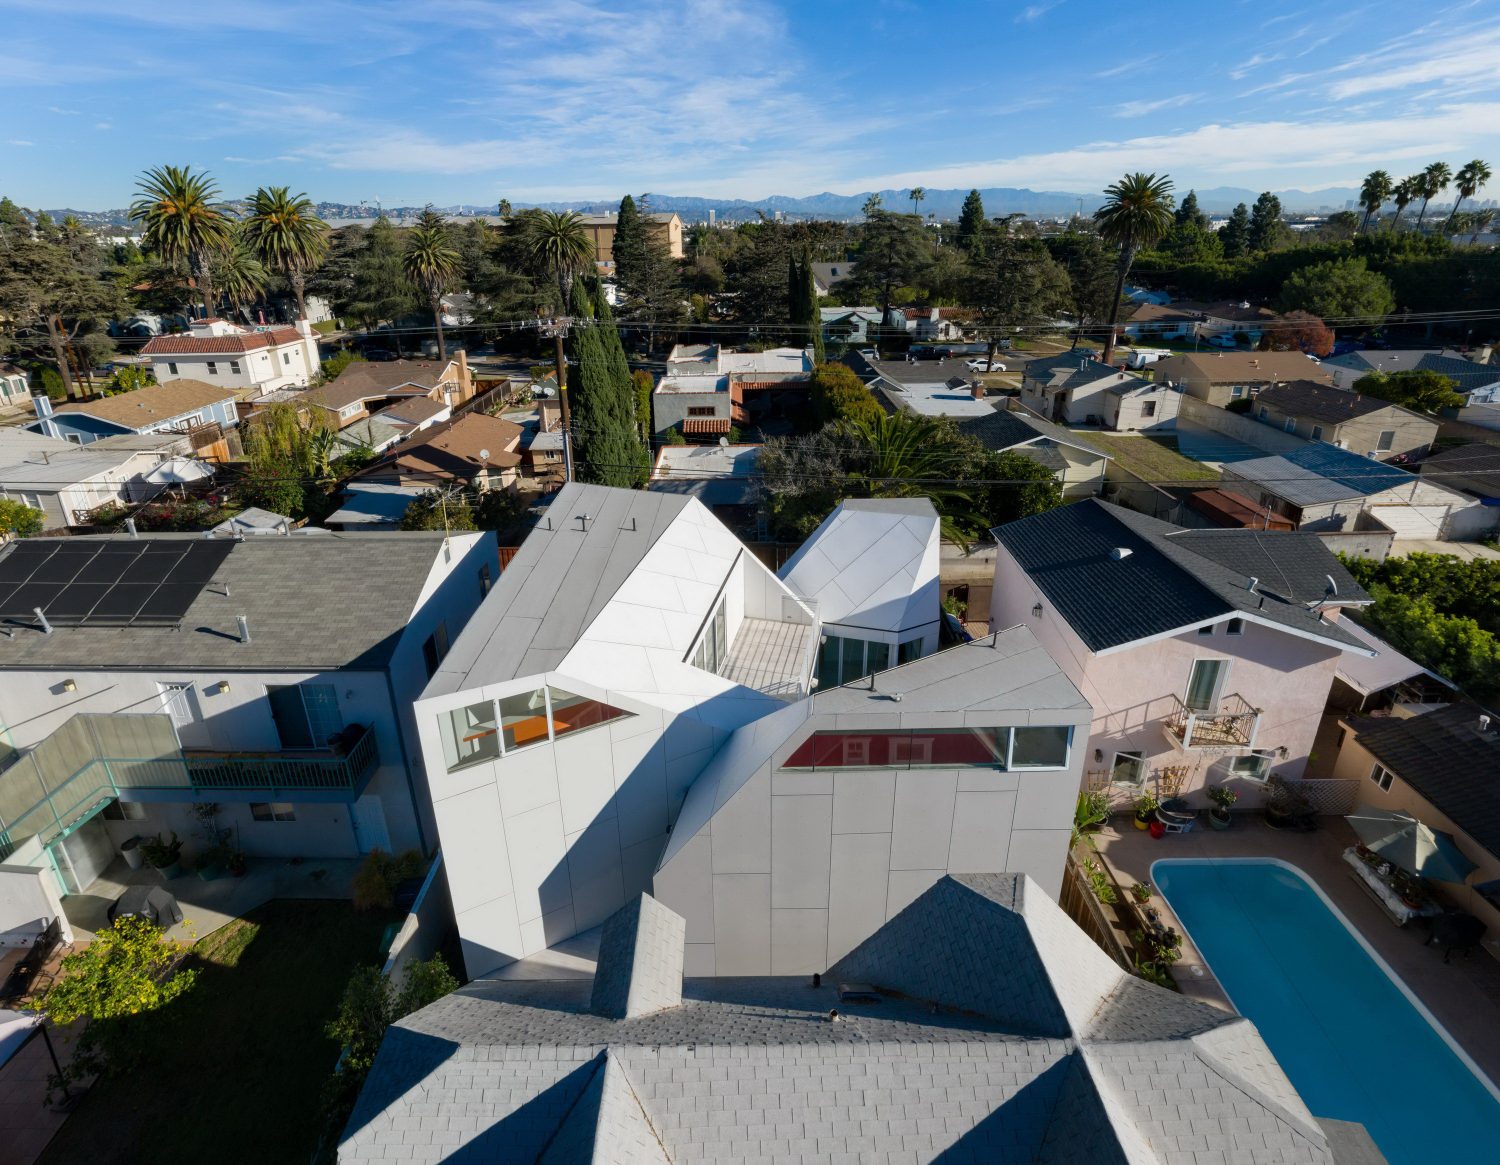 Second House – Home with Steeply Pitched Rooflines by FreelandBuck